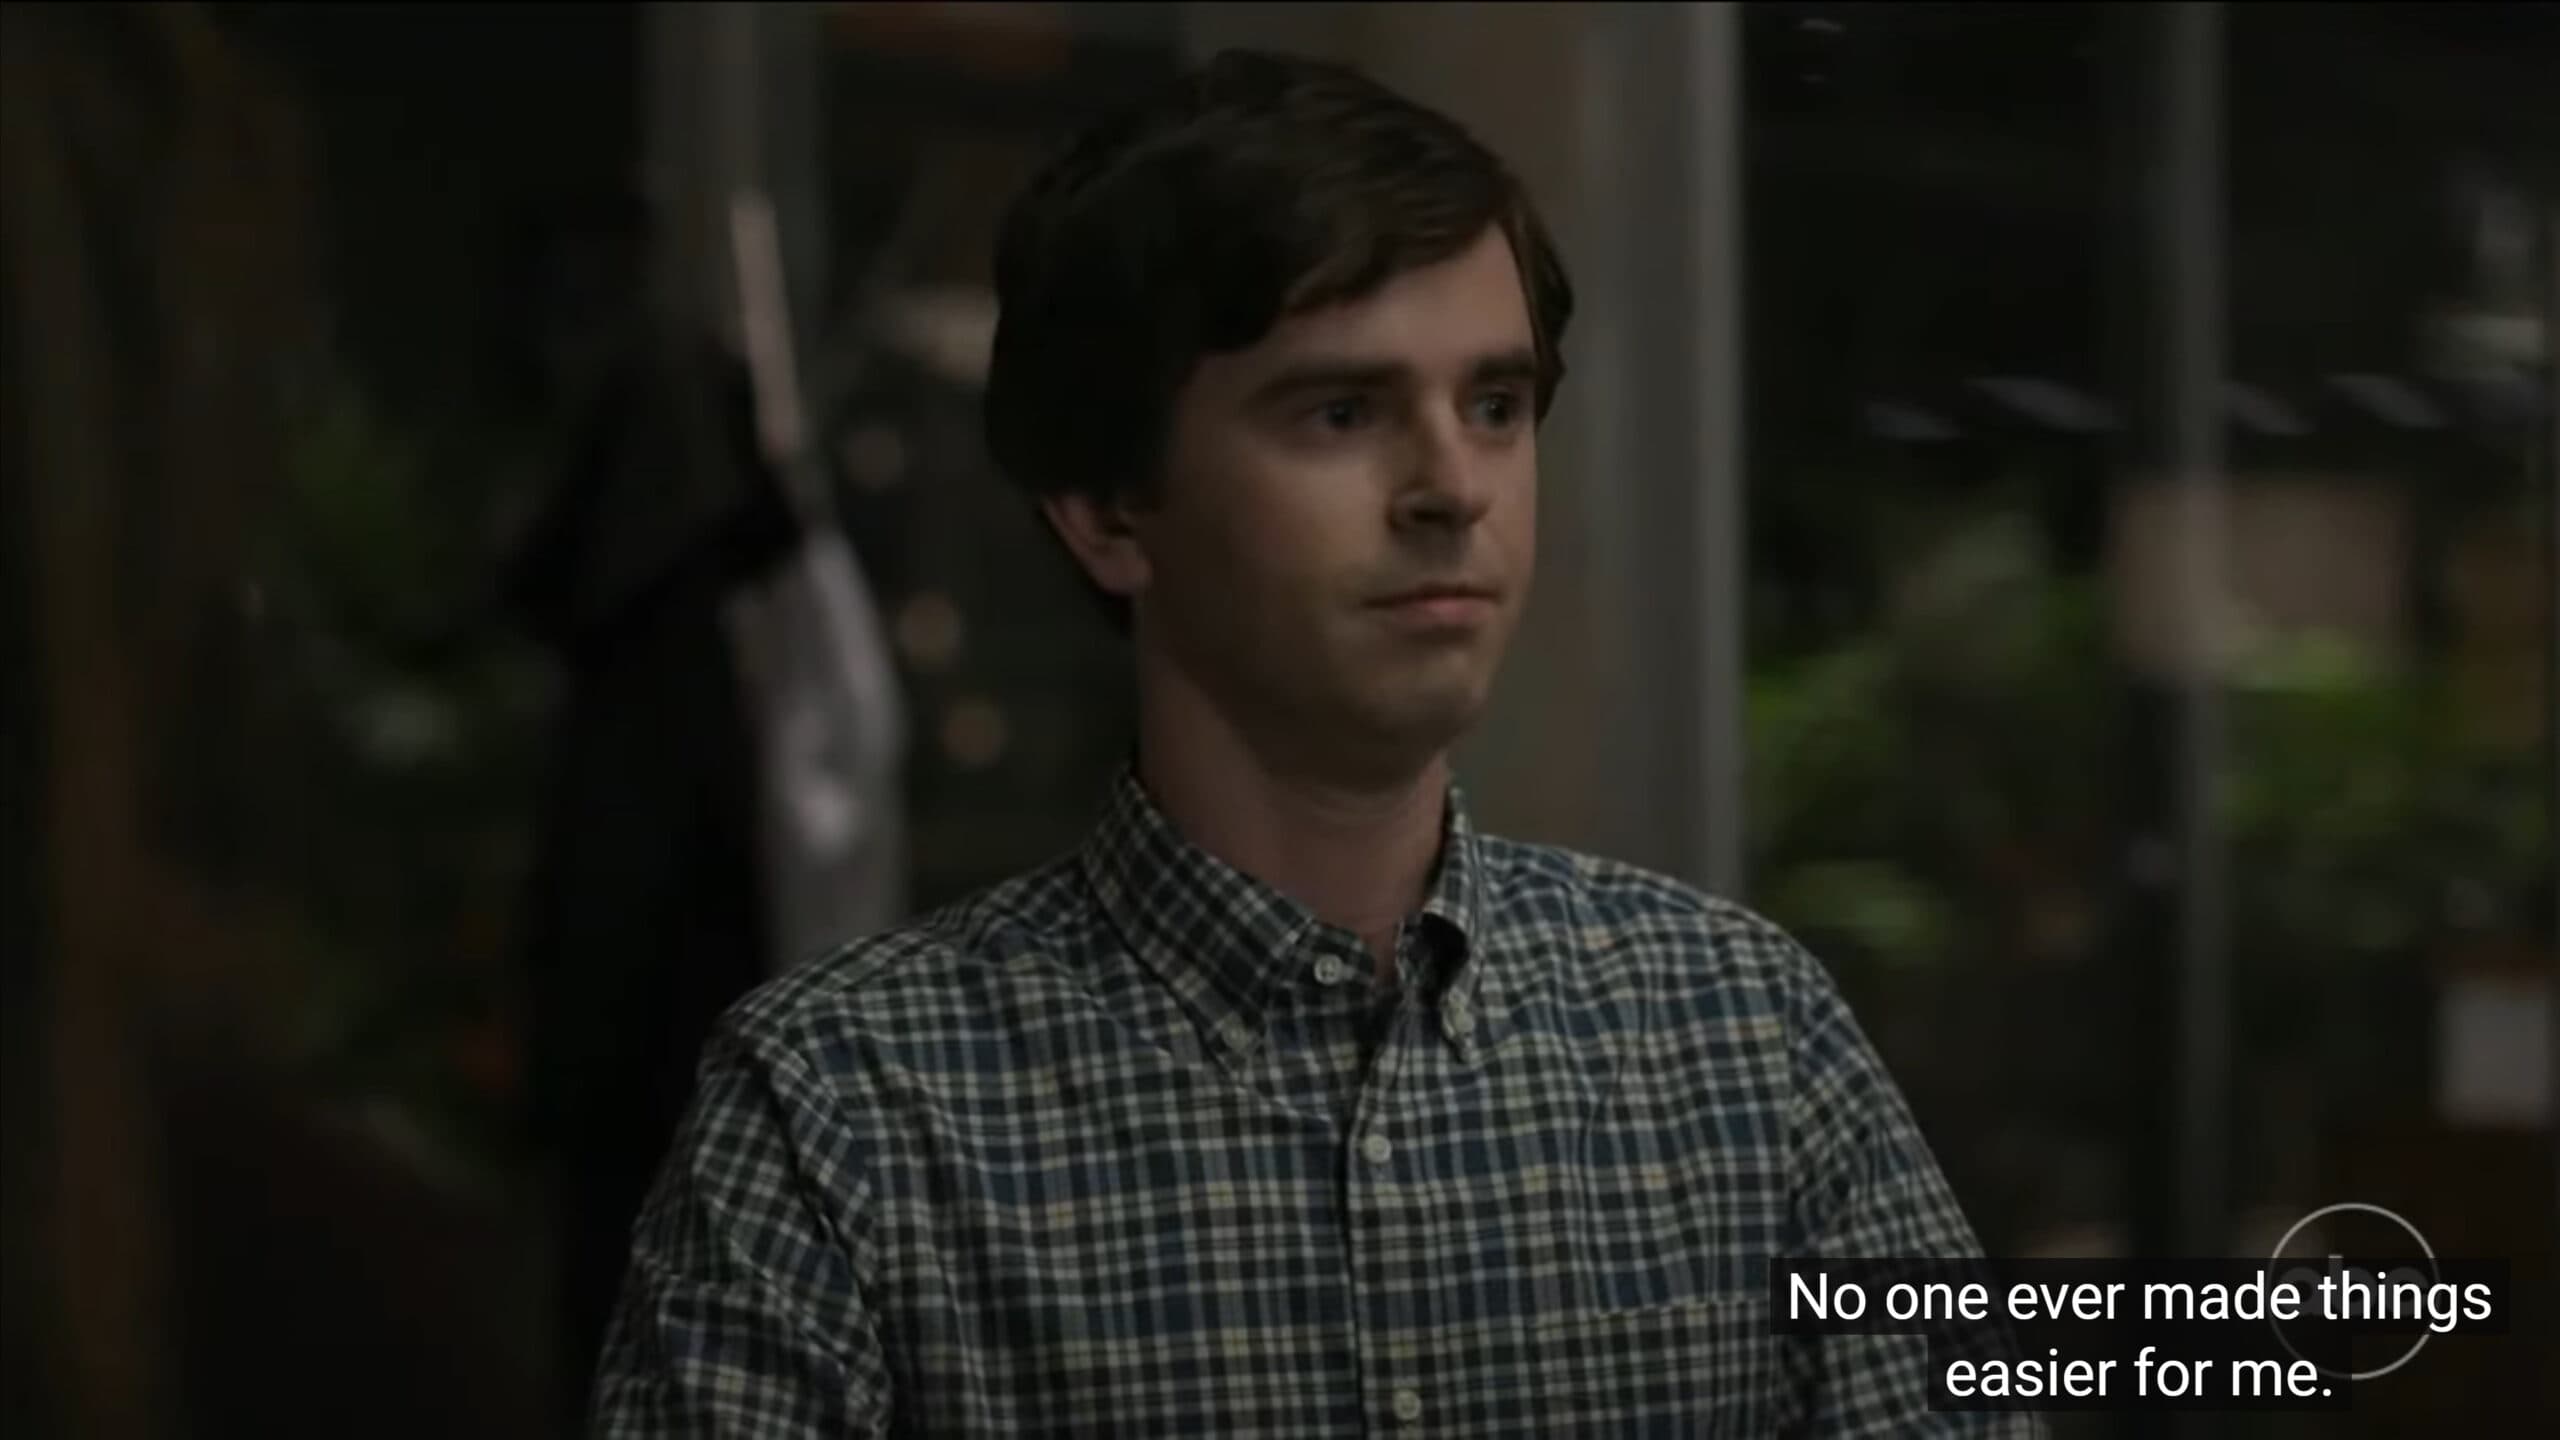 Shaun (Freddie Highmore) upset that people expect him to make things easy for Charlie